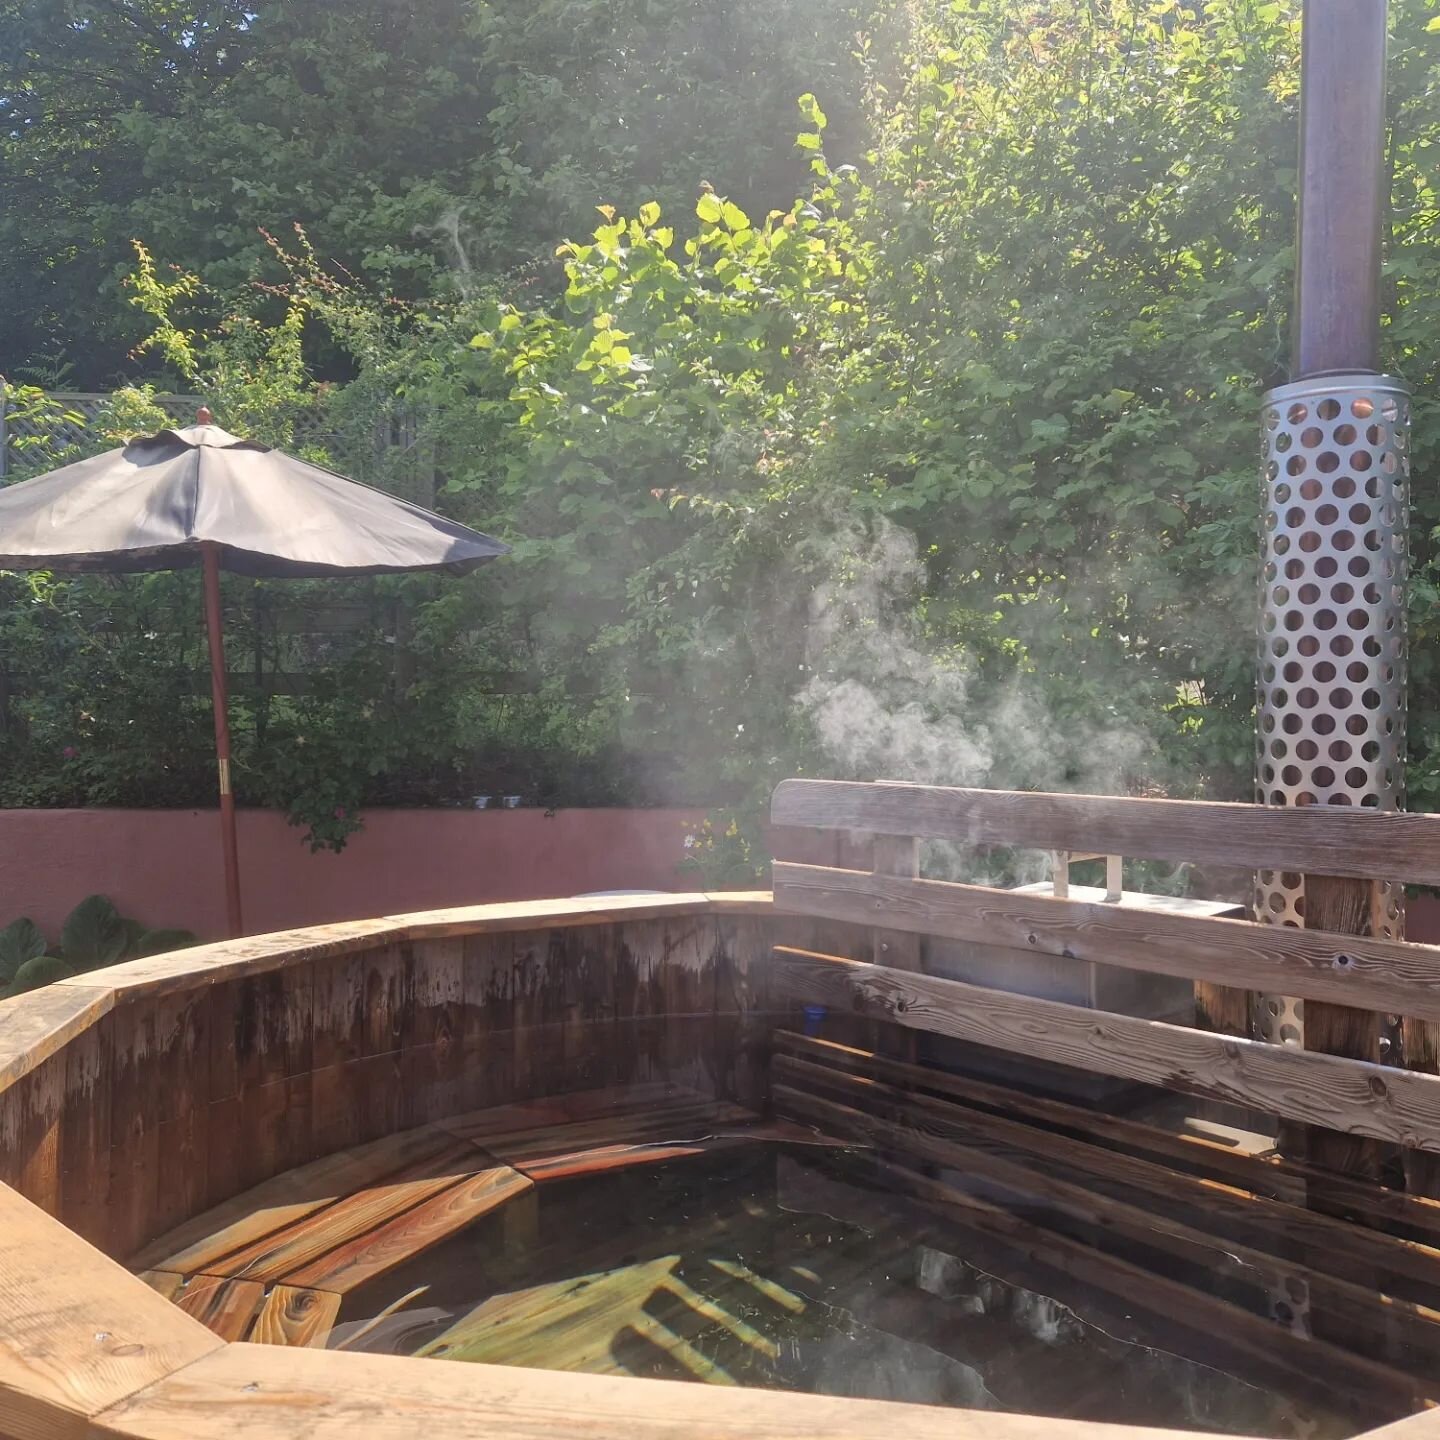 Whatever the weather, it's hard to beat a wind down in the #woodfiredhottub after a day exploring the beautiful #wyevalley
The wildflowers are looking pretty stunning at the moment too!

#forestofdean #deanwye #sawdaystravel #donkeyshedwyevalley #wil